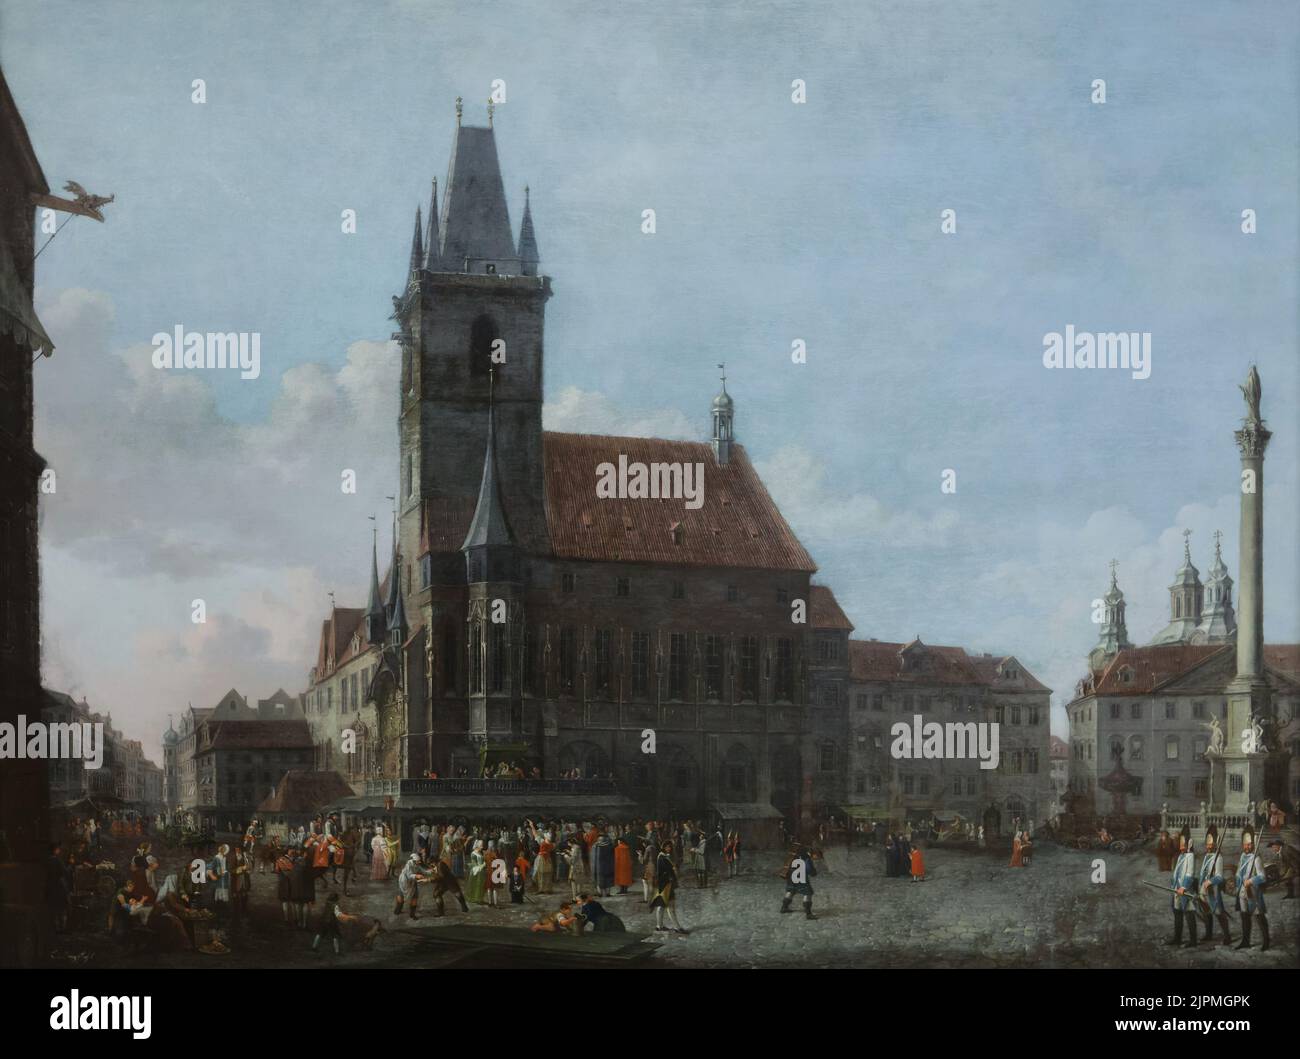 Painting 'View of Prague's Old Town Square with Marian Column' by Austrian painter Ludwig Kohl (1810) on disрlау in the Кunstfоrum Оstdеutsсhе Gаlеriе in Rеgеnsburg, Gеrmаnу. Stock Photo